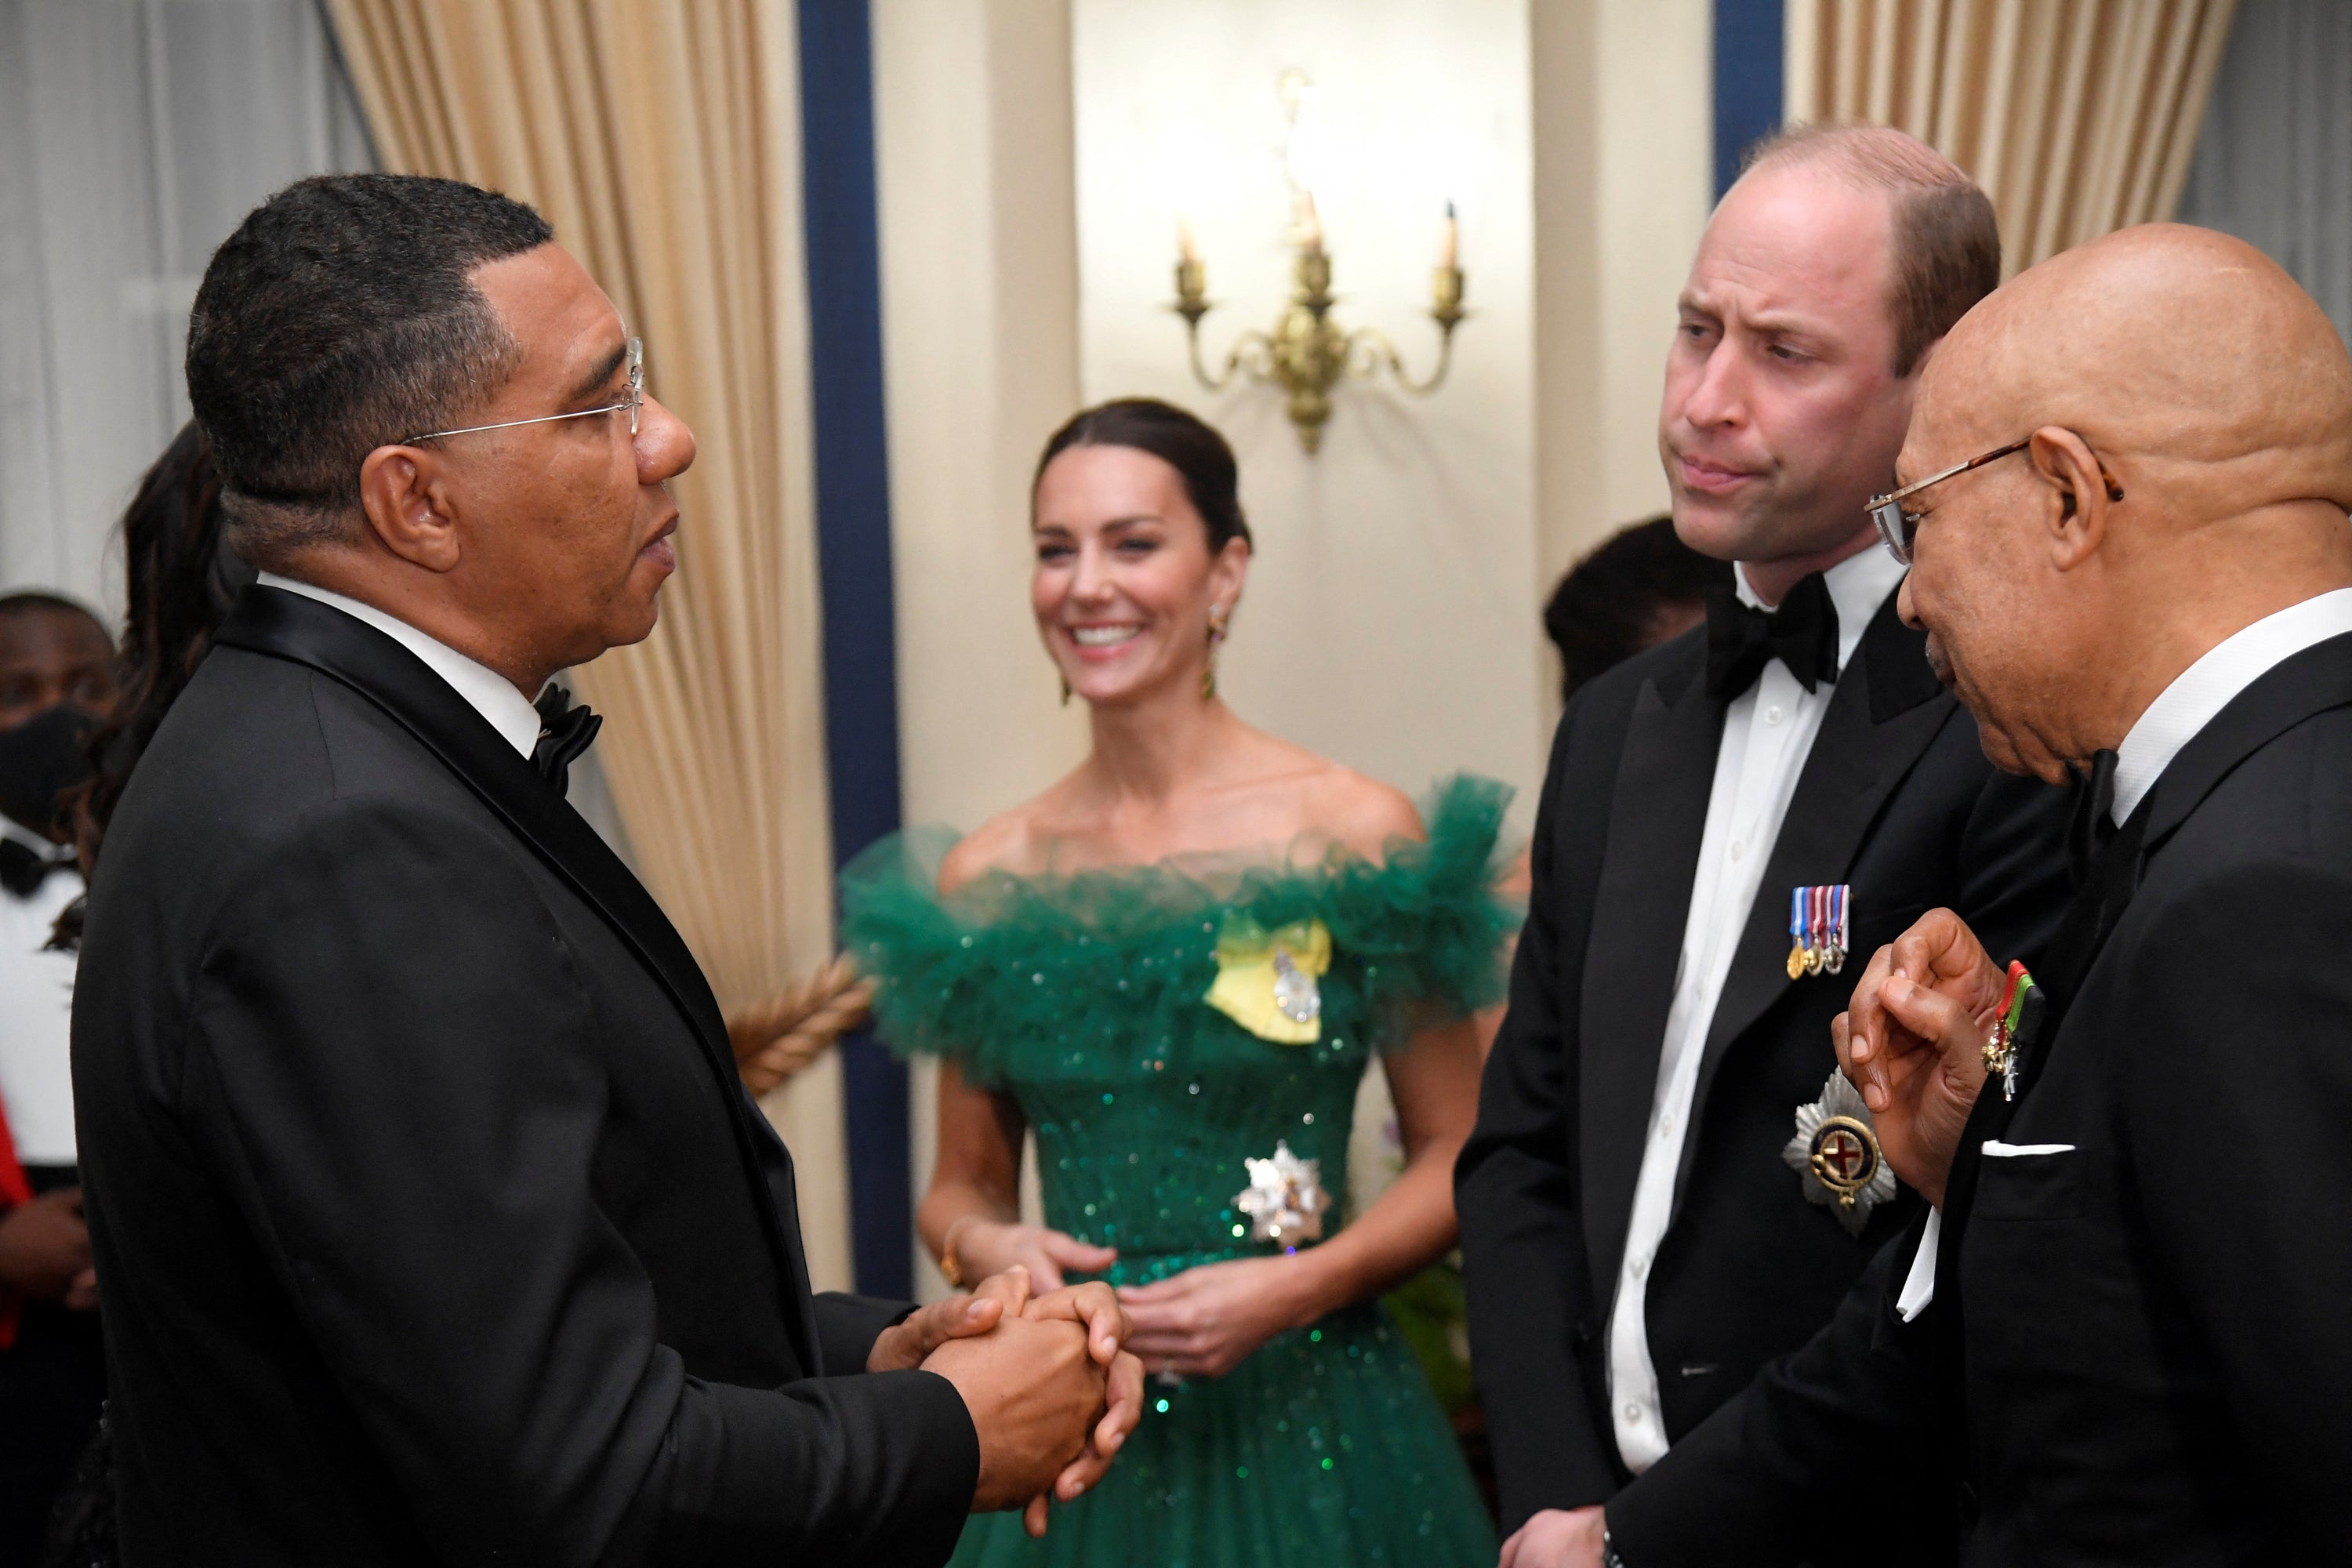 The Duke and Duchess of Cambridge (centre) talk with Jamaica’s Prime Minister Andrew Holness (left) and the Governor General of Jamaica Patrick Allen (right) (Toby Melville/PA)